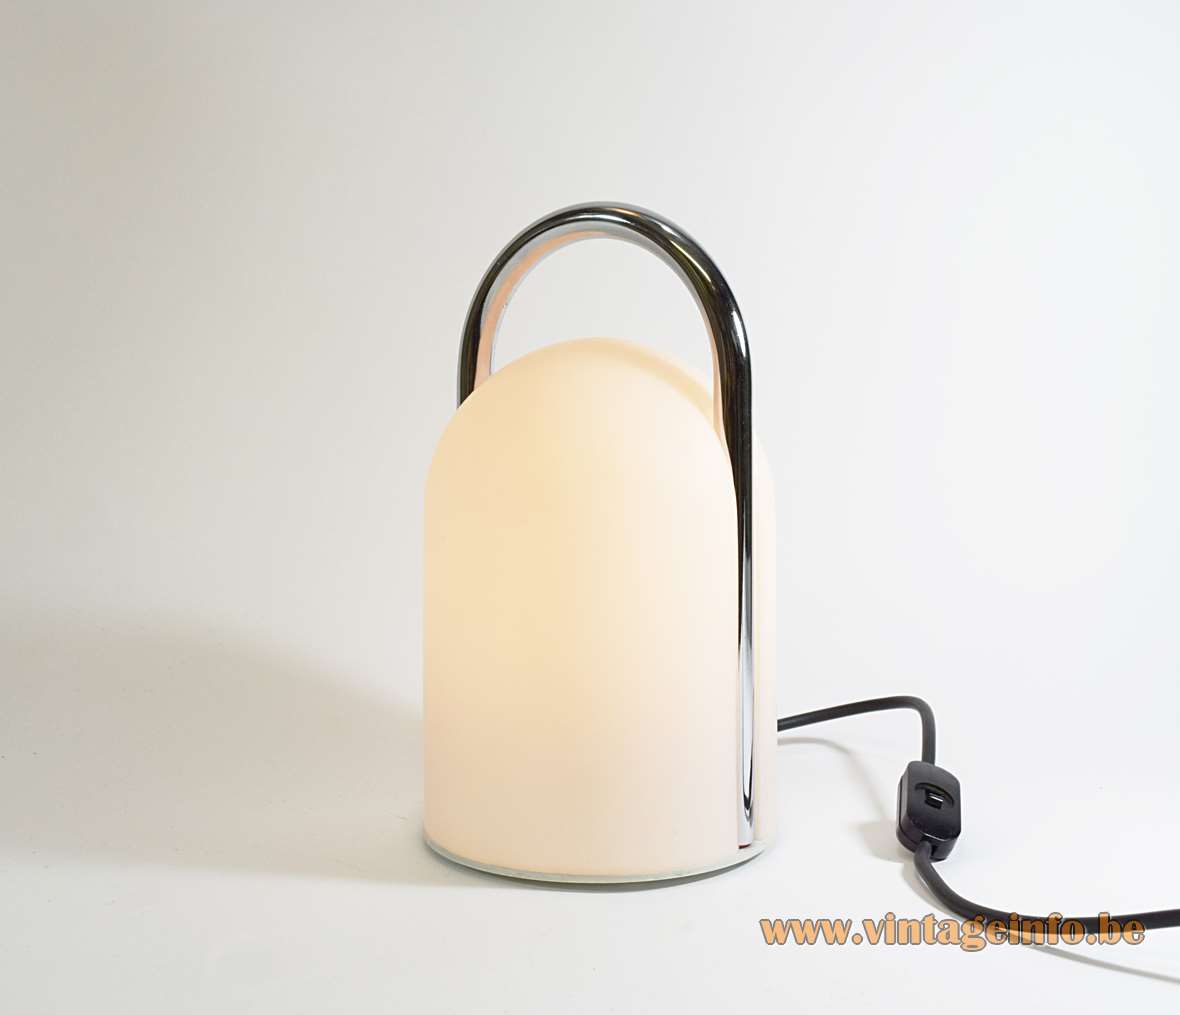 Romolo Lanciani Tender table lamp frosted opal glass lampshade chrome handle Tronconi 1970s design Italyanciani Tender table lamp in frosted opal glass with a chrome handle Tronconi 1970s